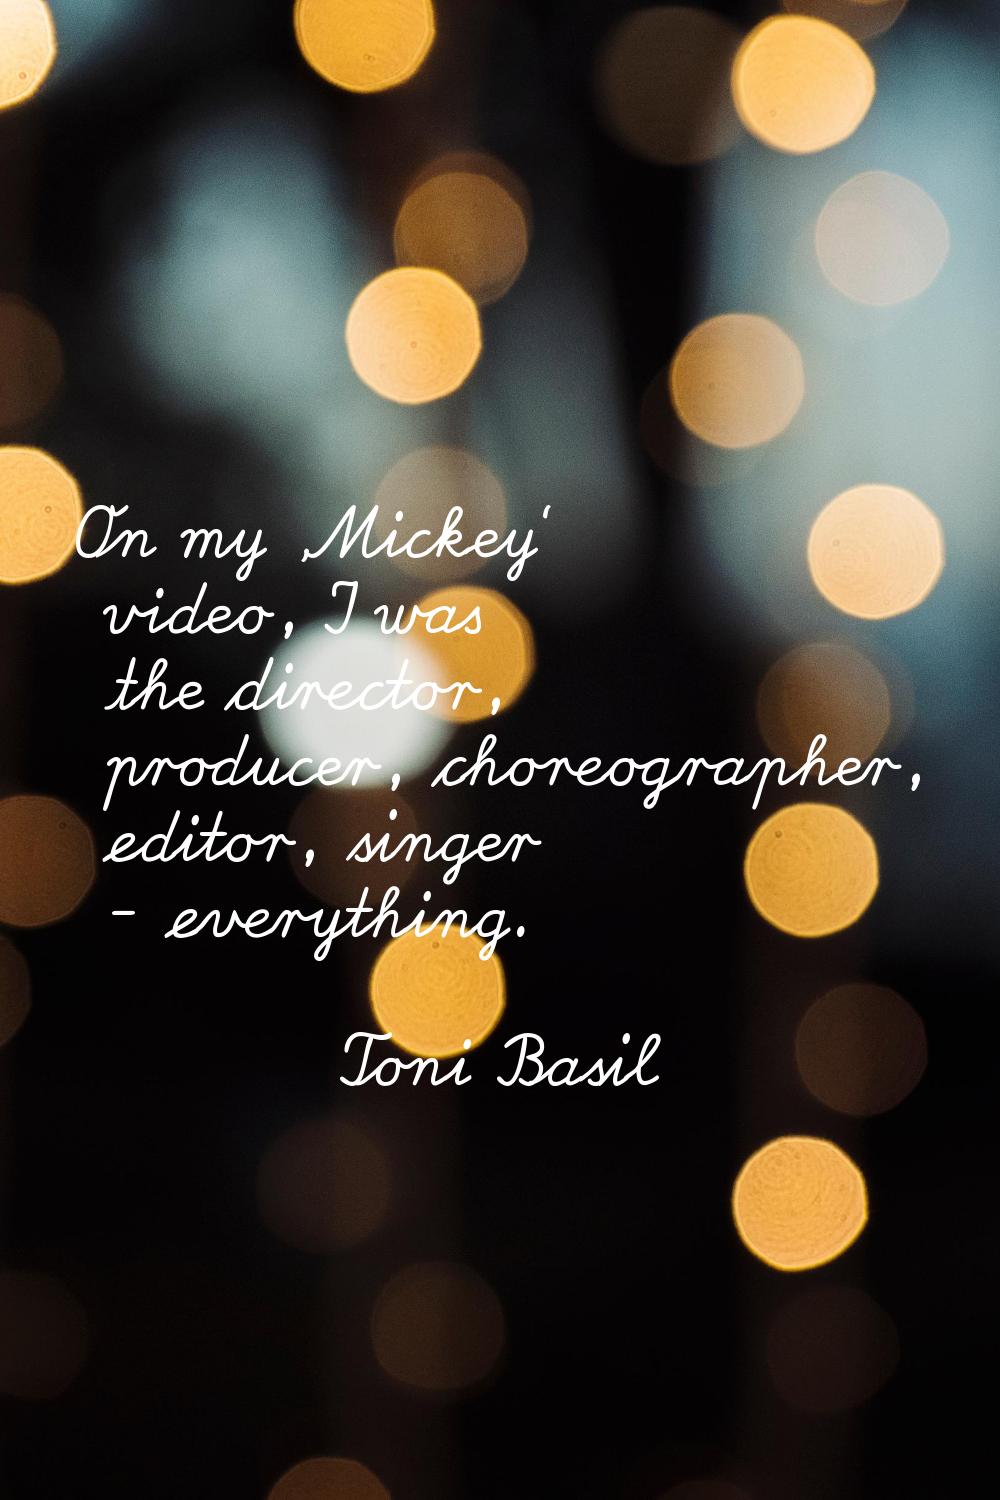 On my 'Mickey' video, I was the director, producer, choreographer, editor, singer - everything.